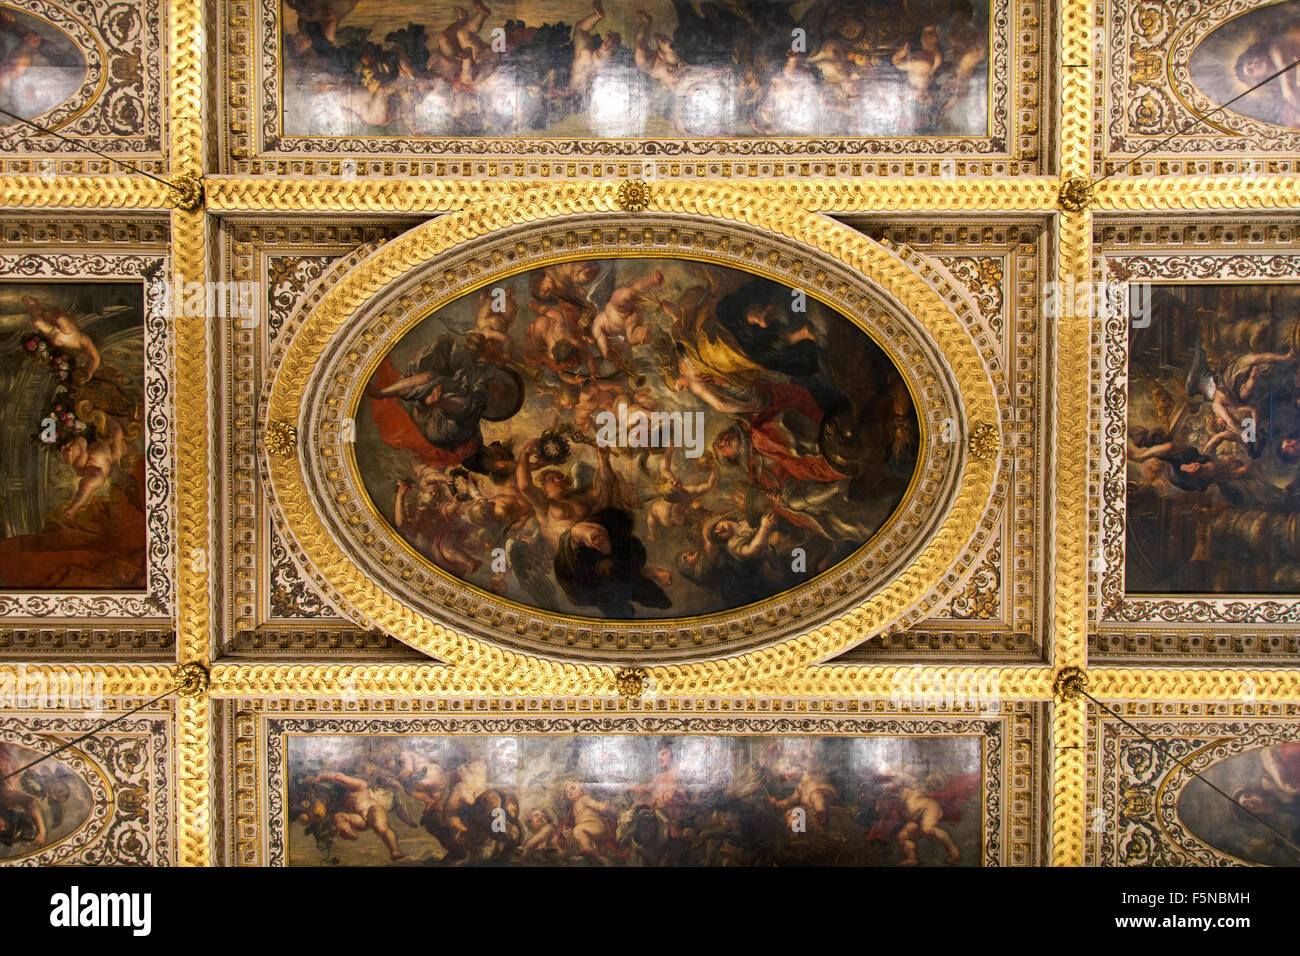 The Rubens' Ceiling of the Banqueting Hall in London, UK Stock Photo